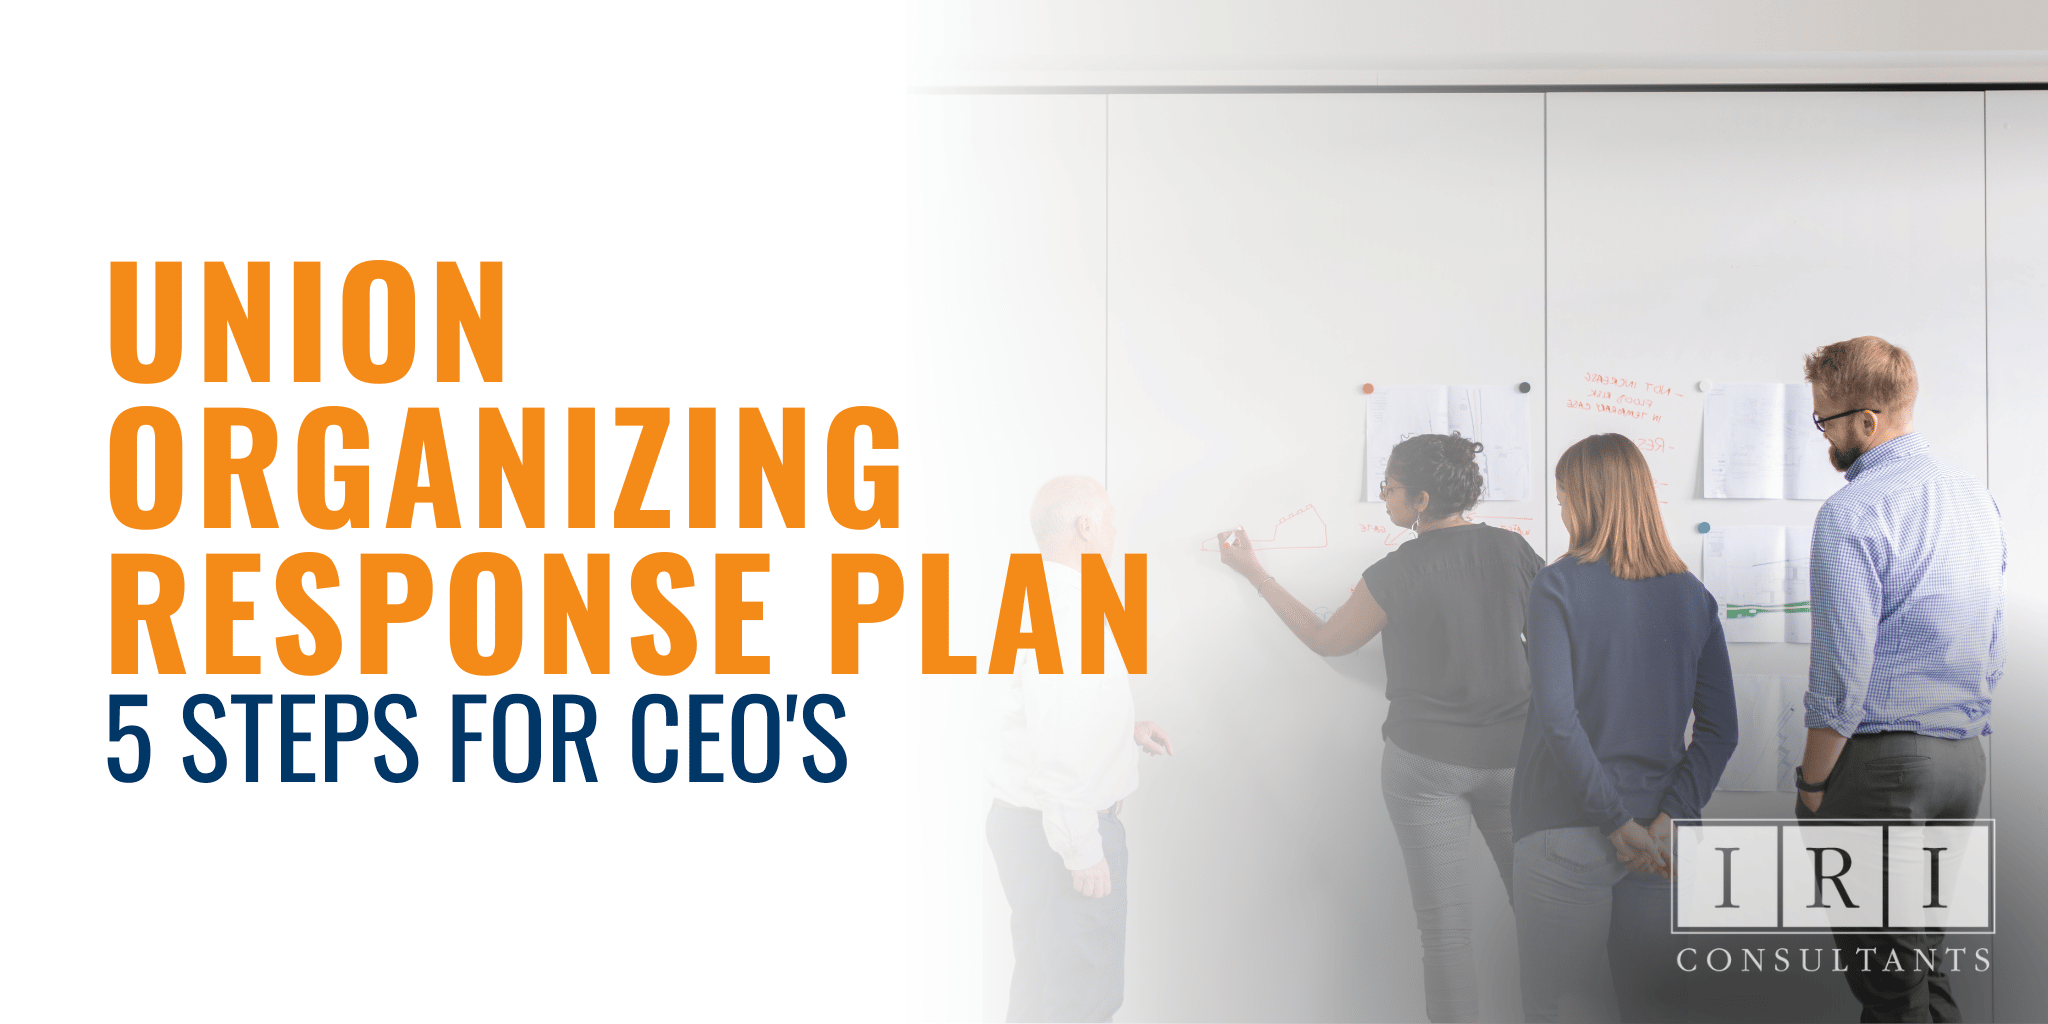 Union Organizing Response Plan 5 Steps for CEO's